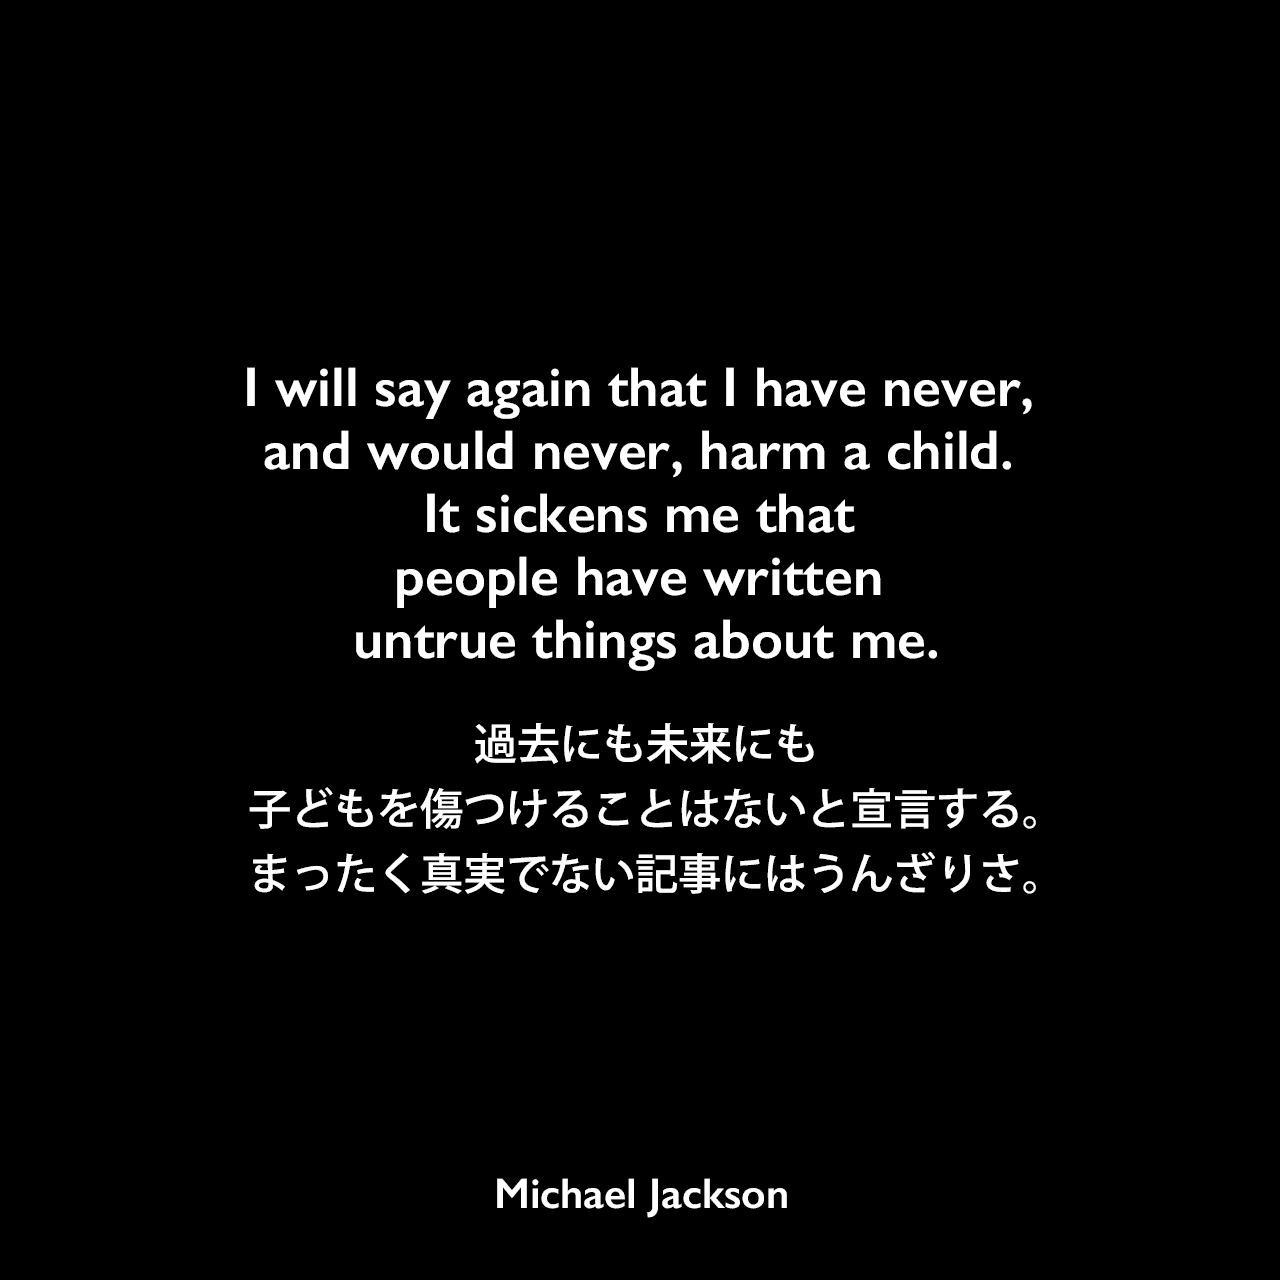 I will say again that I have never, and would never, harm a child. It sickens me that people have written untrue things about me.過去にも未来にも子どもを傷つけることはないと宣言する。まったく真実でない記事にはうんざりさ。Michael Jackson